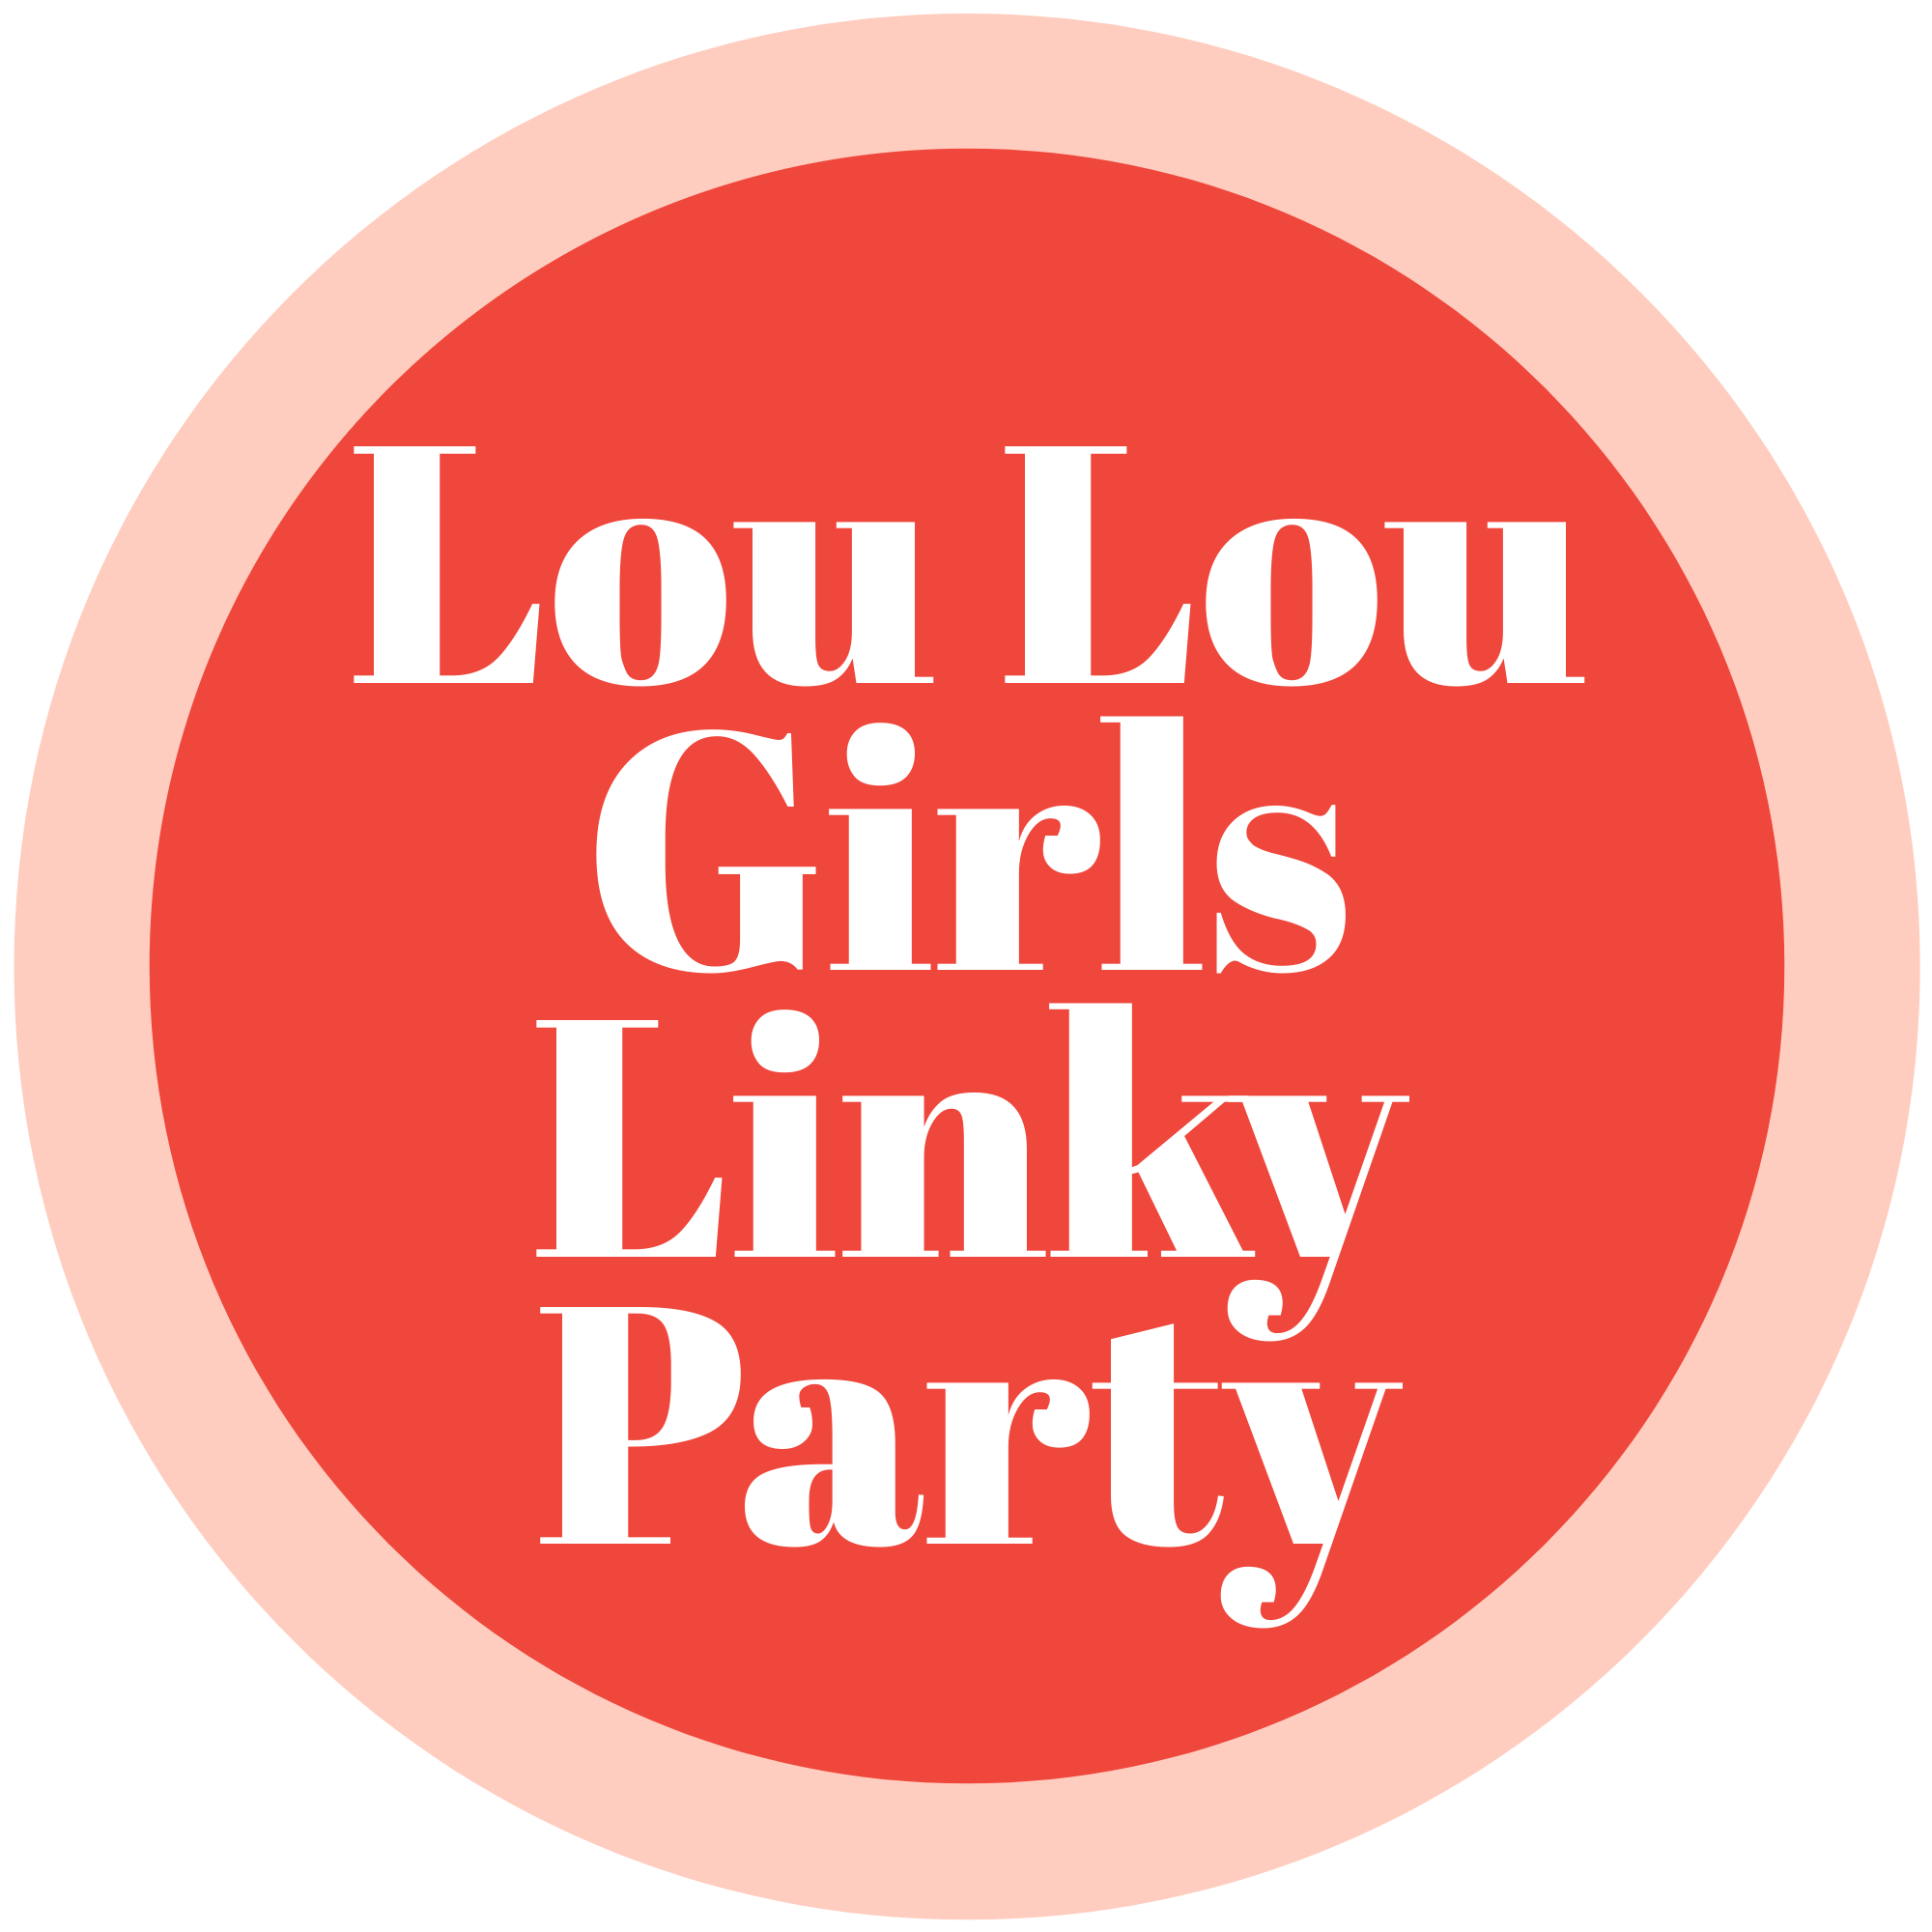 Lou Lou Girls Fabulous Party 497 #linkyparty #bloghop #linkyparties